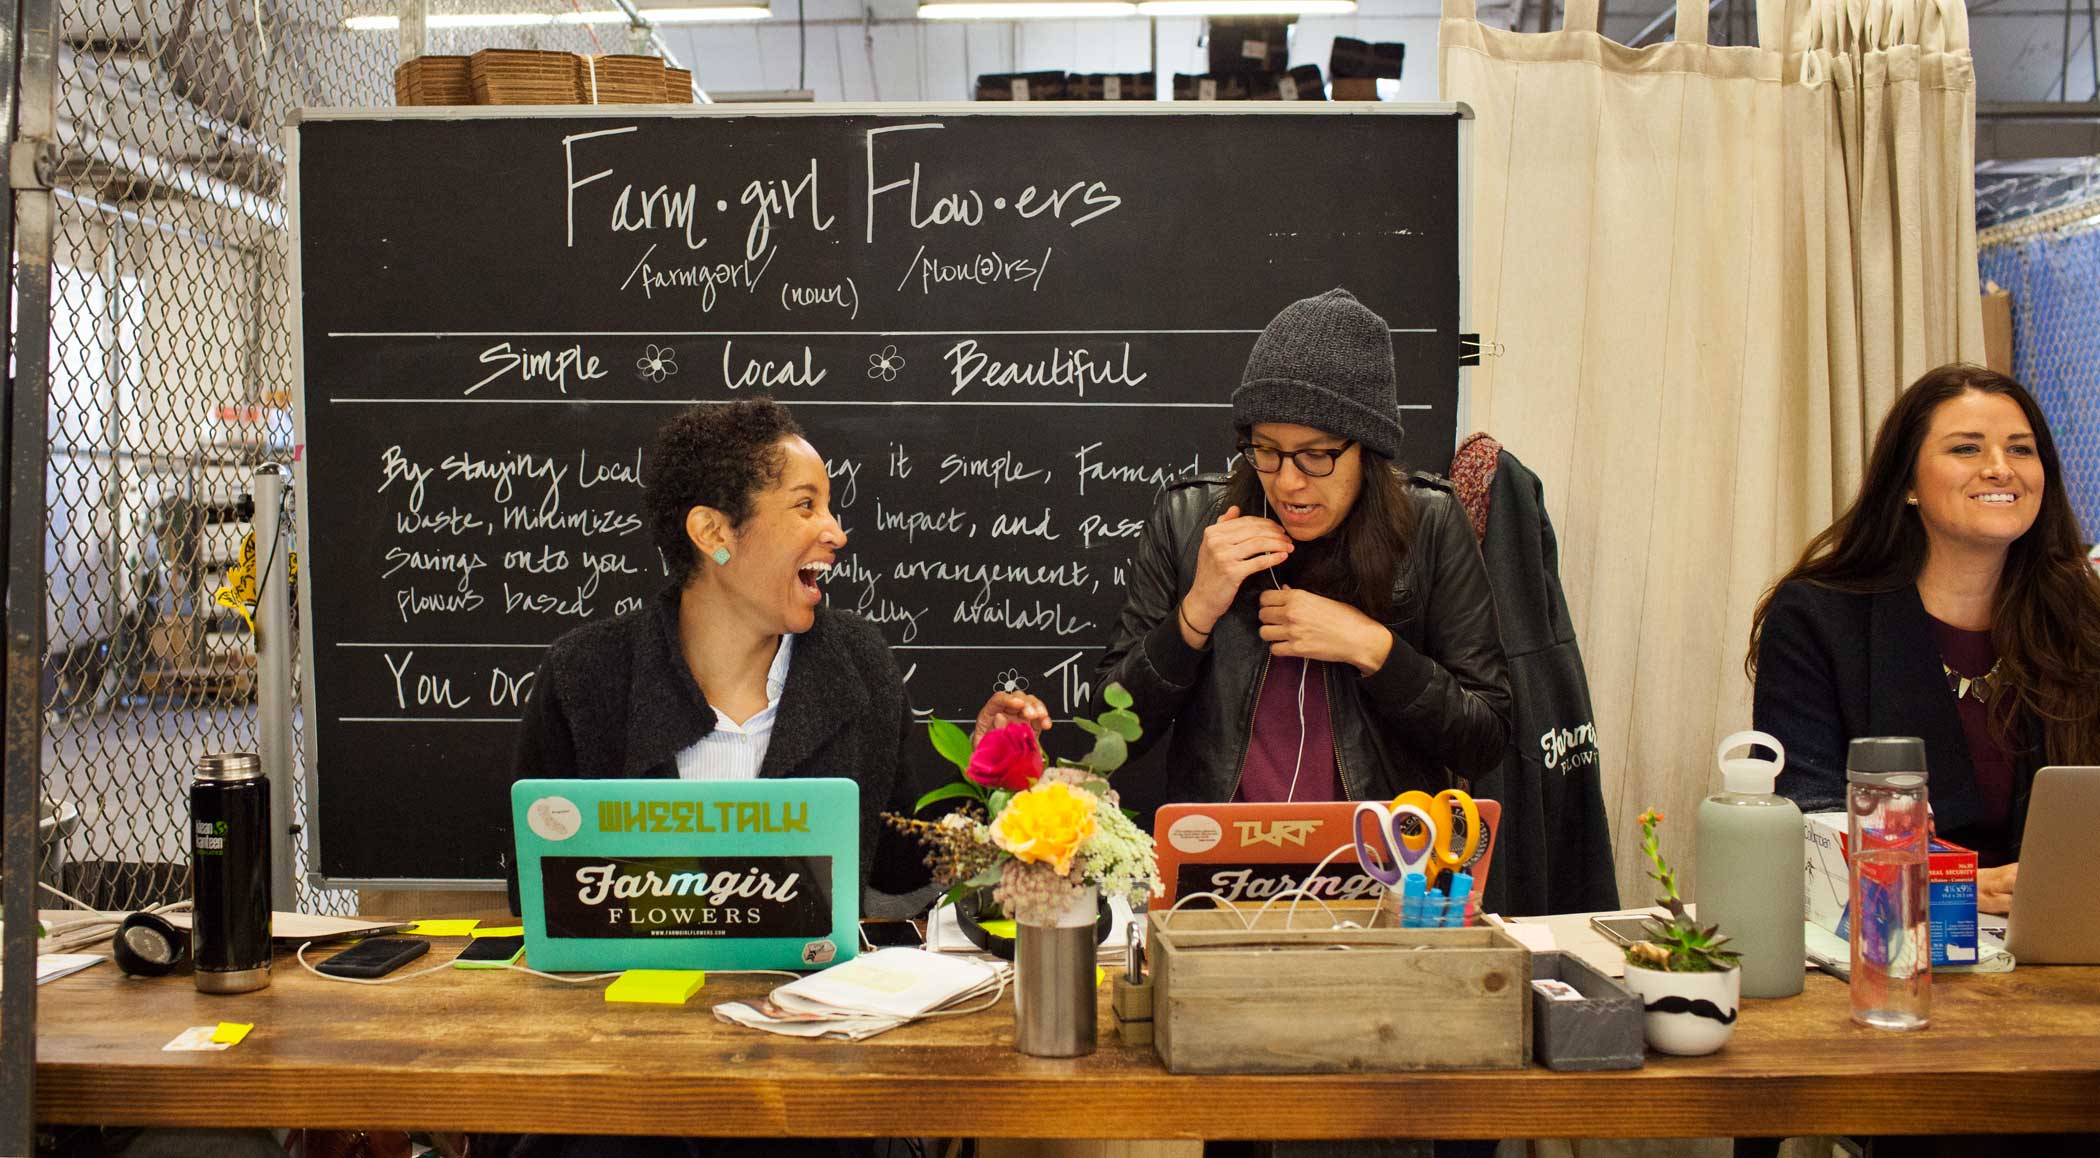 The customer service department at Farmgirl Flowers.